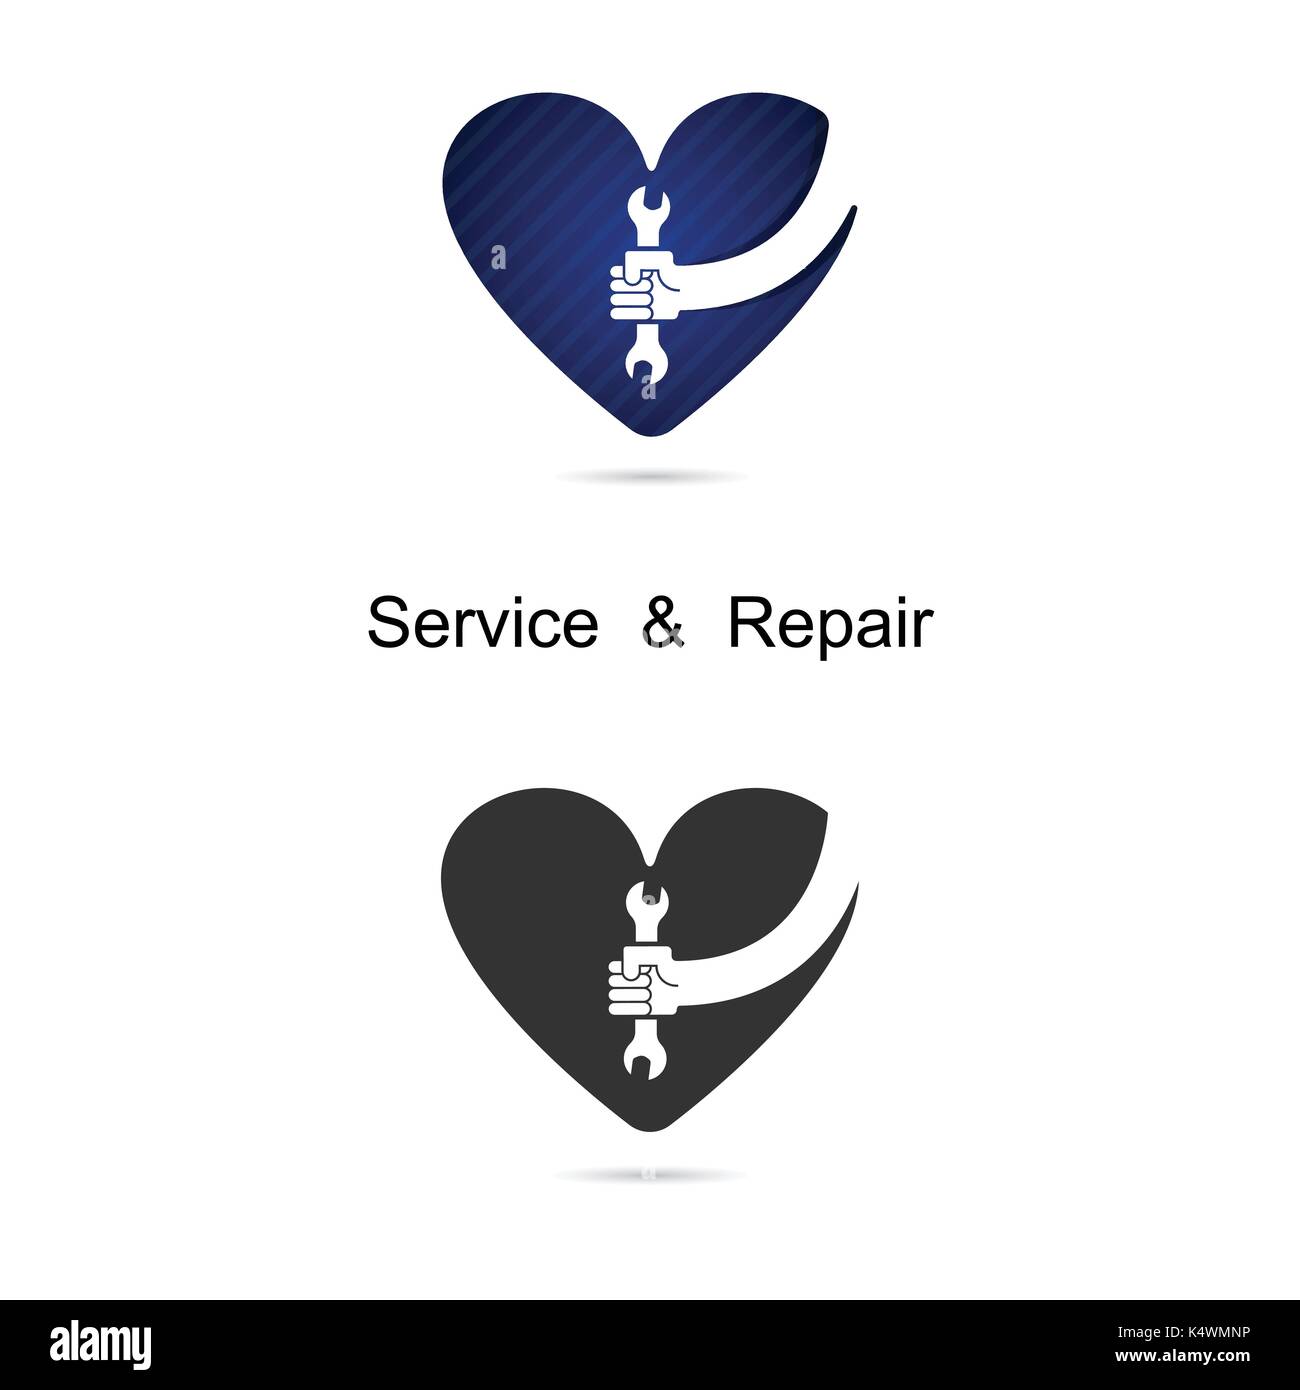 Human Hand icon and wrench with heart shape vector logo design template.Love & Service tool icon.Maintenance & Technical support concept.Vector illust Stock Vector